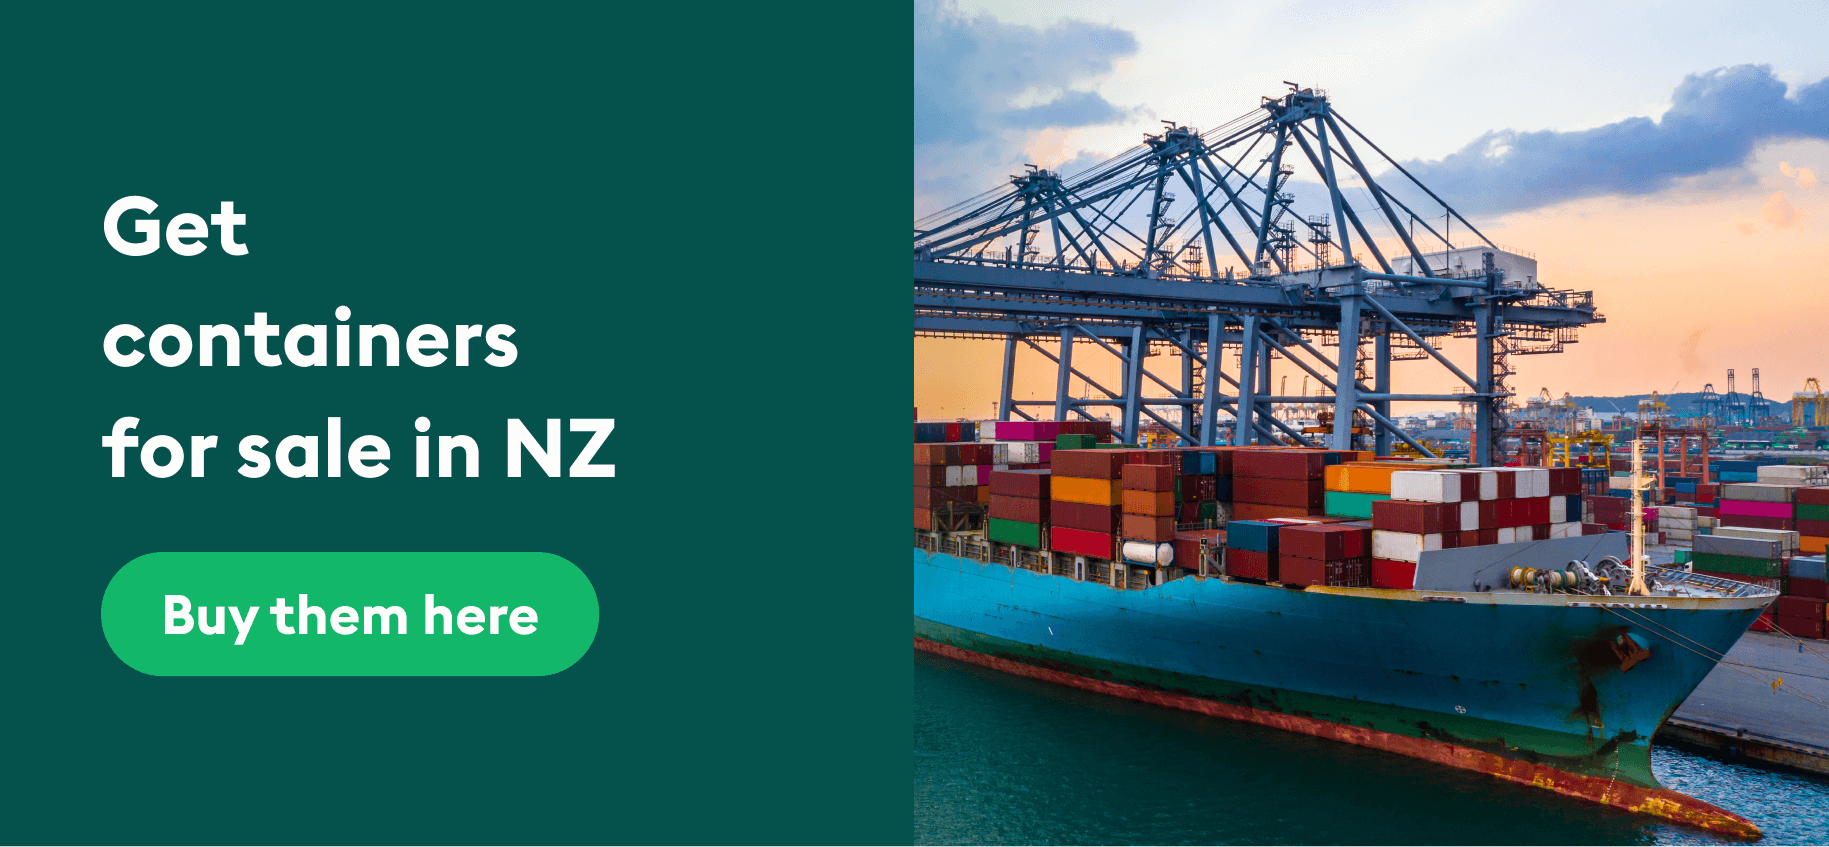 Containers for sale NZ big banner